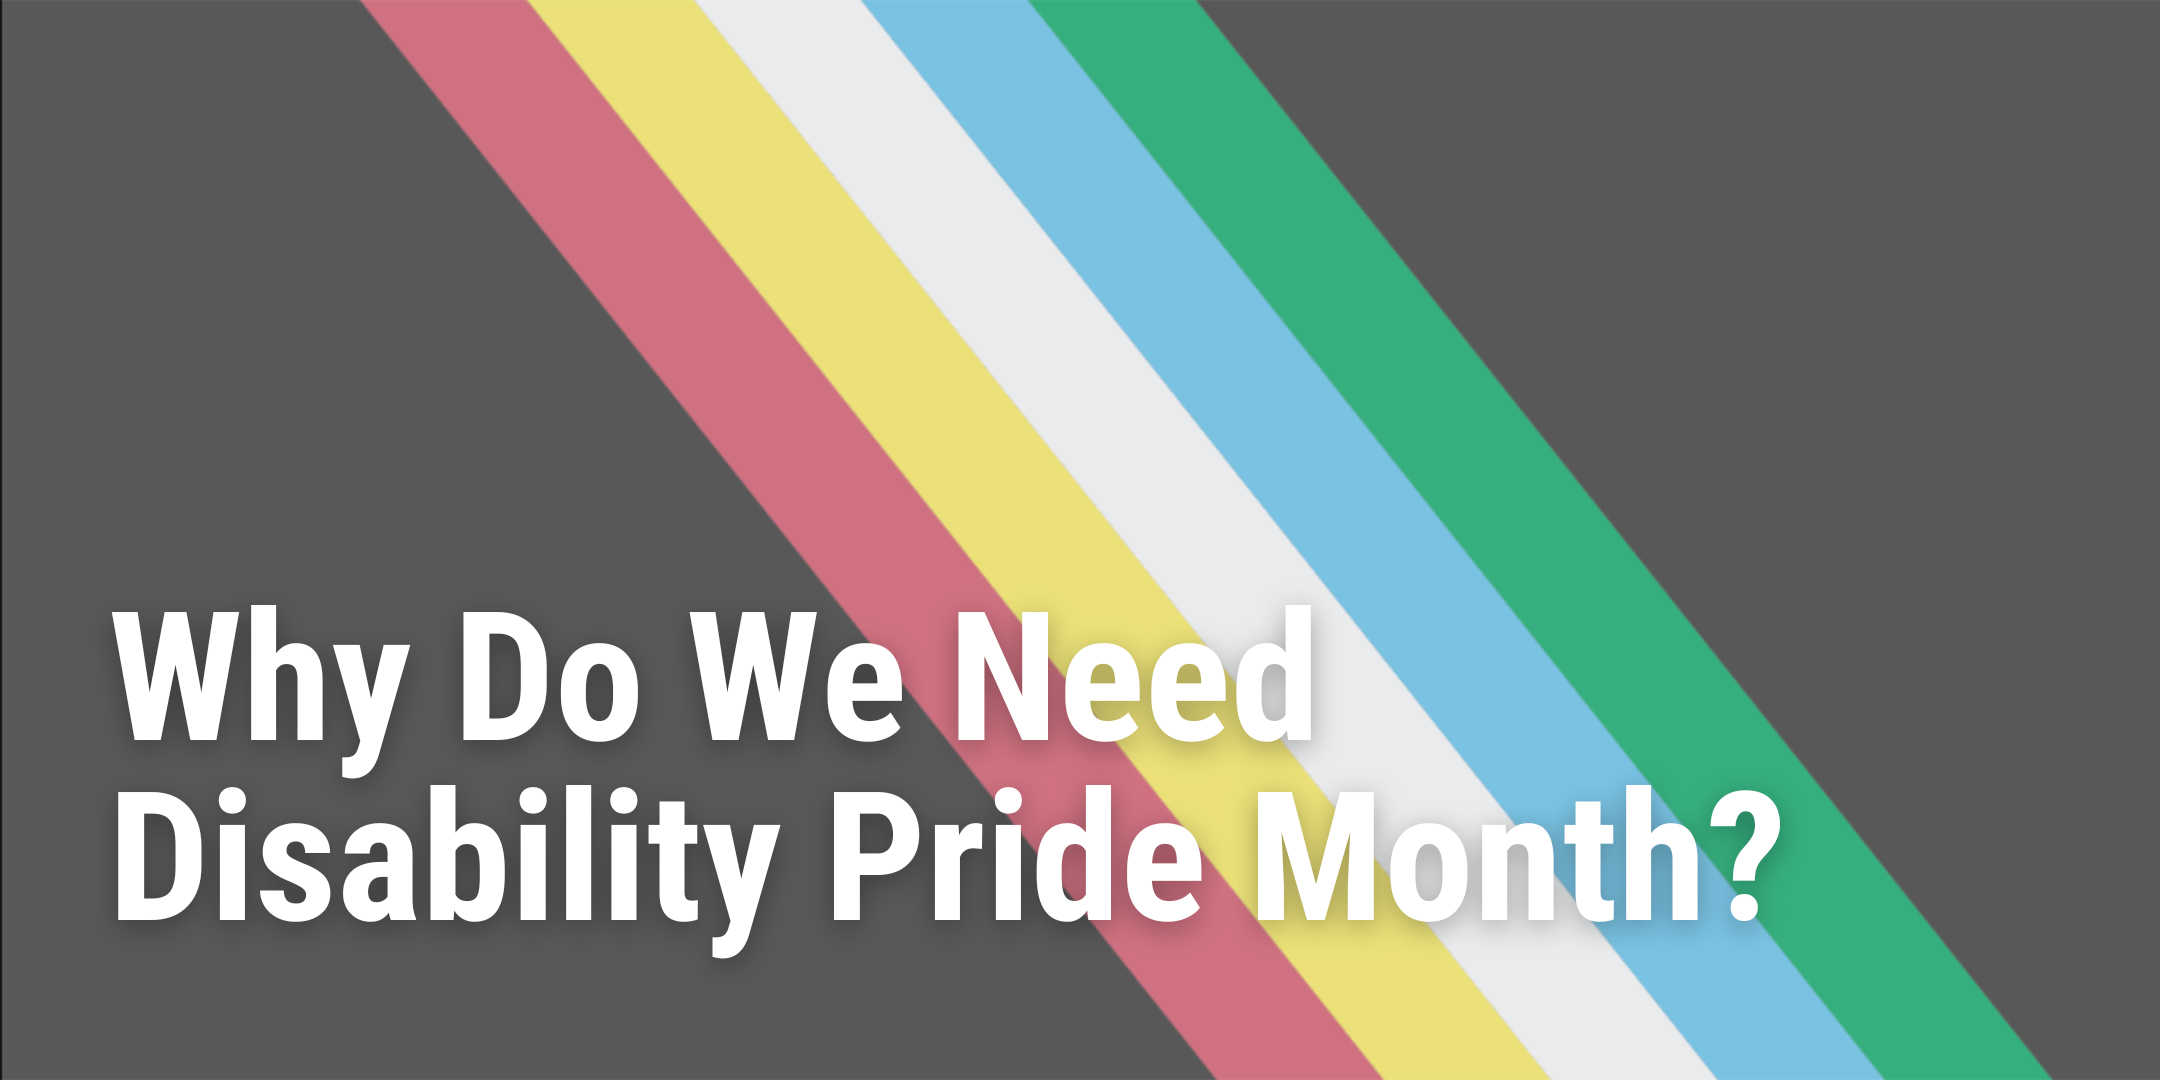 Banner displaying blog title "Why Do We Need Disability Pride Month?" overlaying the disability pride flag.  A black background with muted, slanted color stripes through the middle. The colors are green, blue, white, yellow, and red.